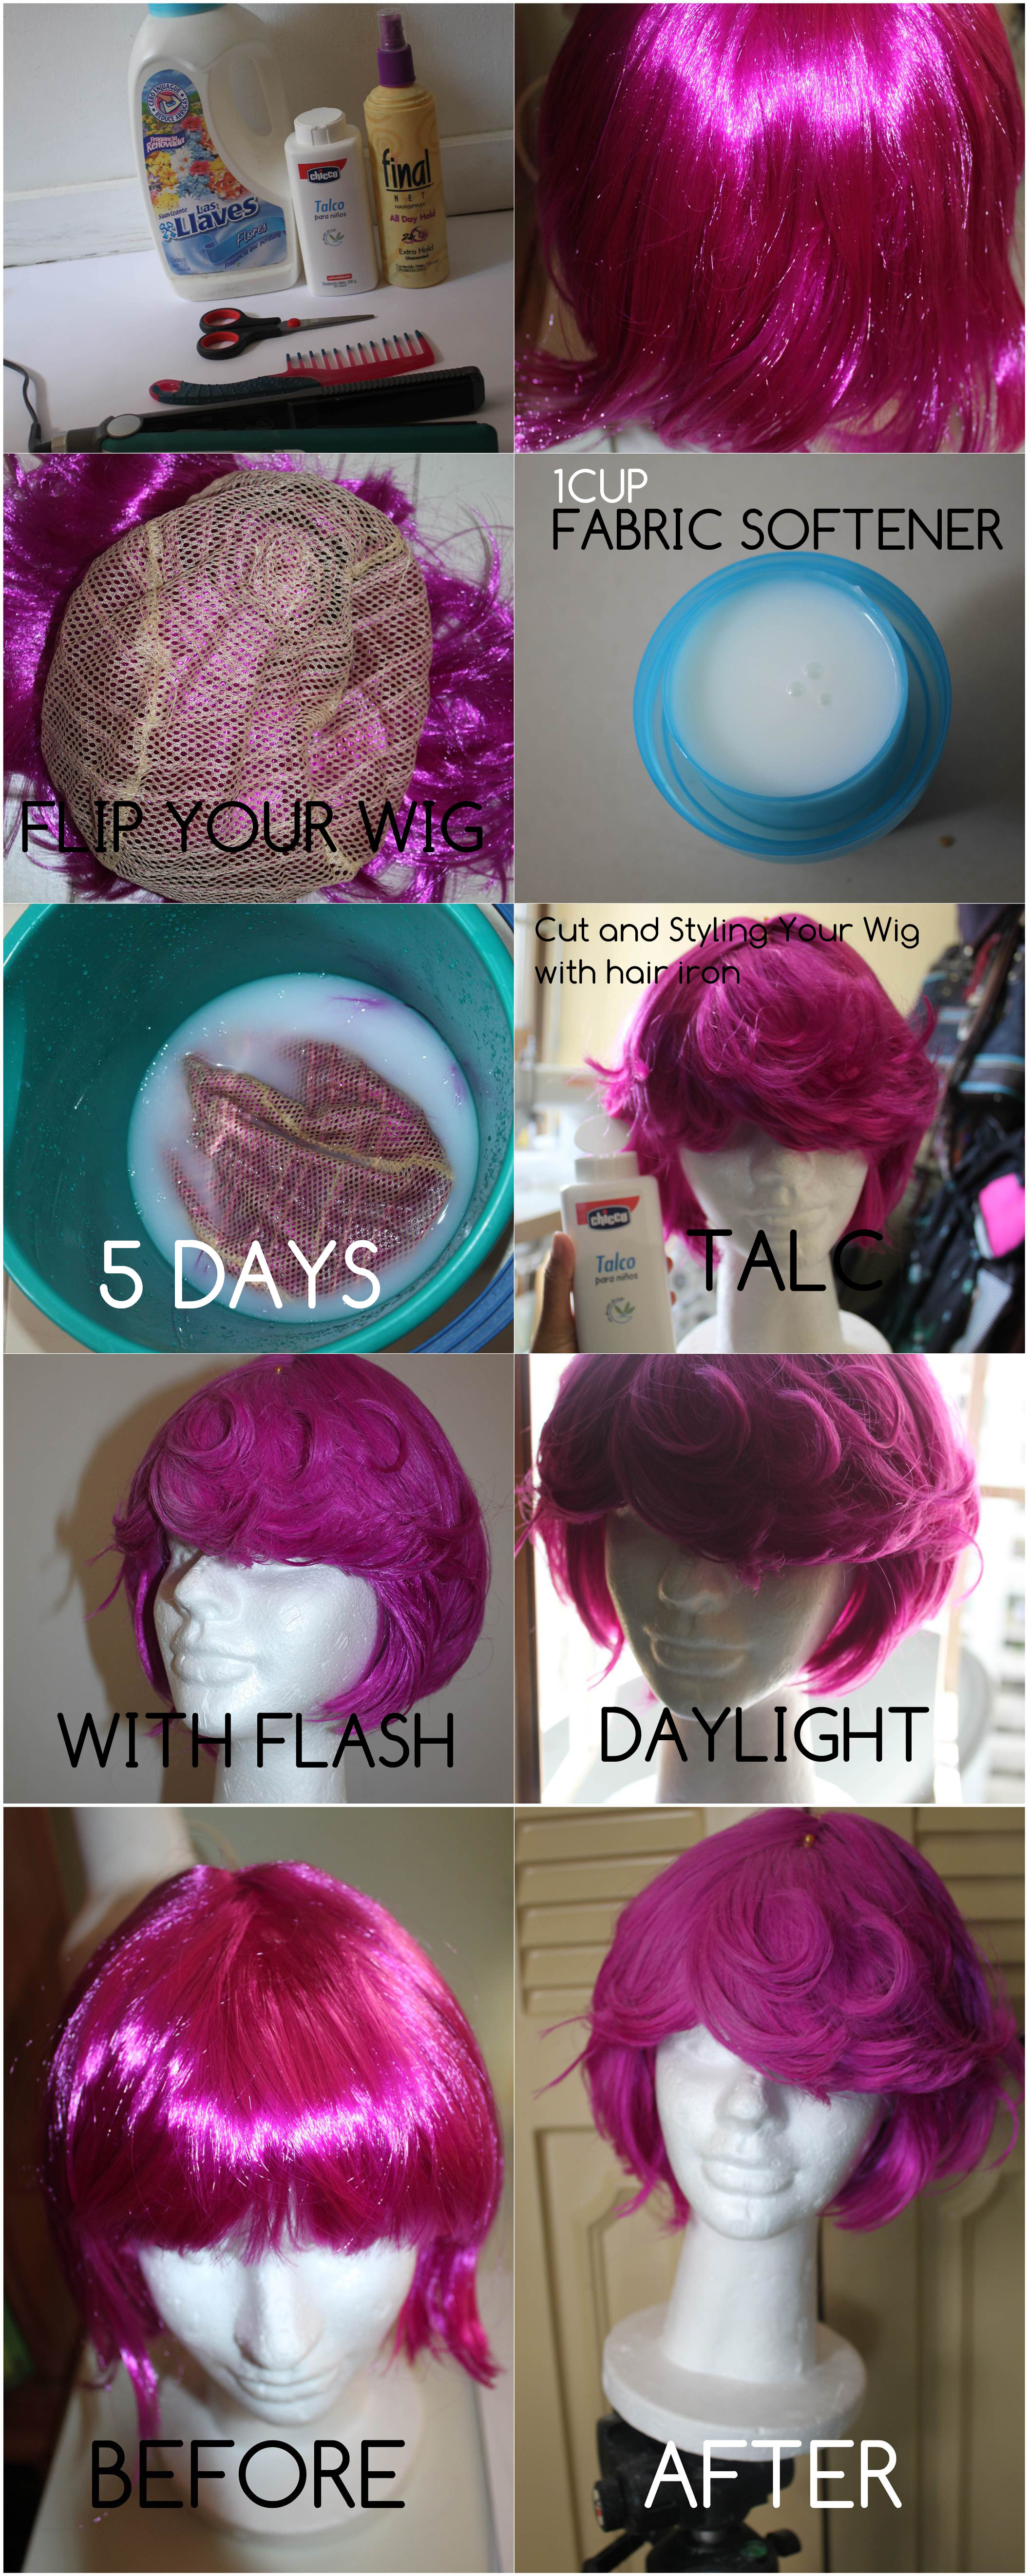 Removing the shine to your wig